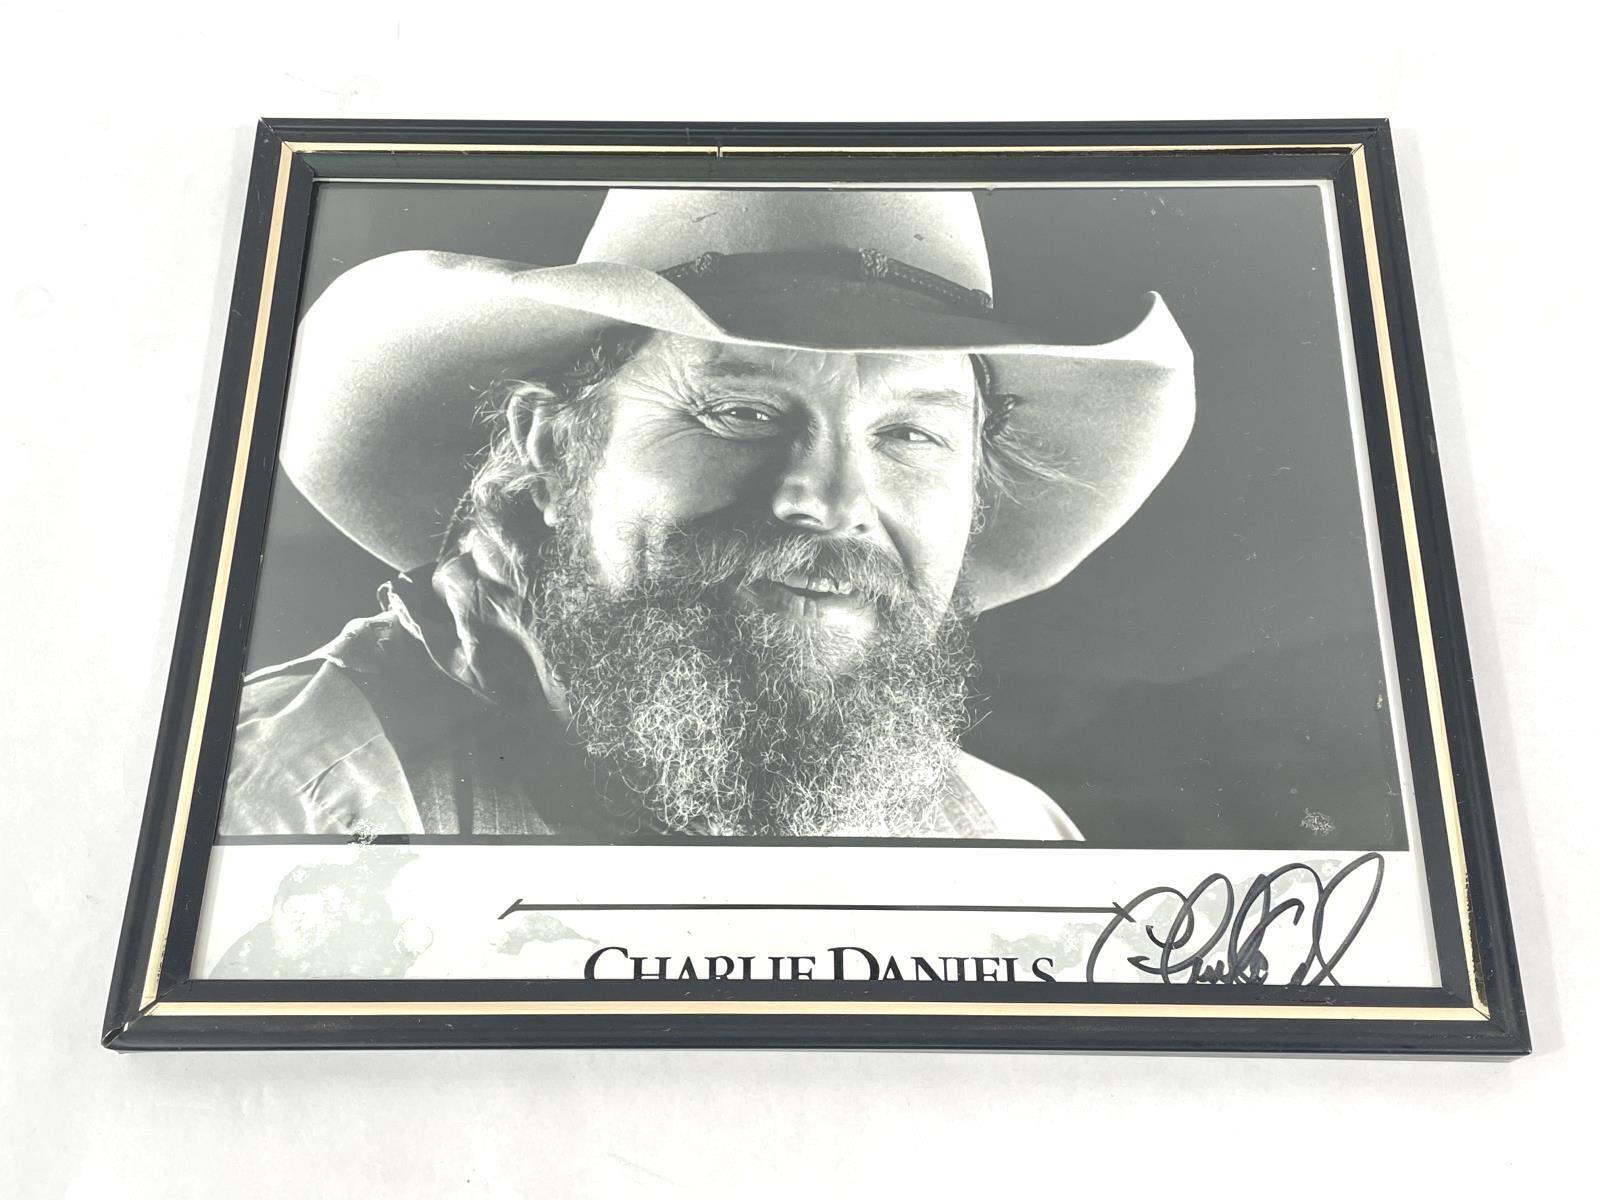 Framed 8 x10 Autographed Charlie Daniels Black And White Photograph